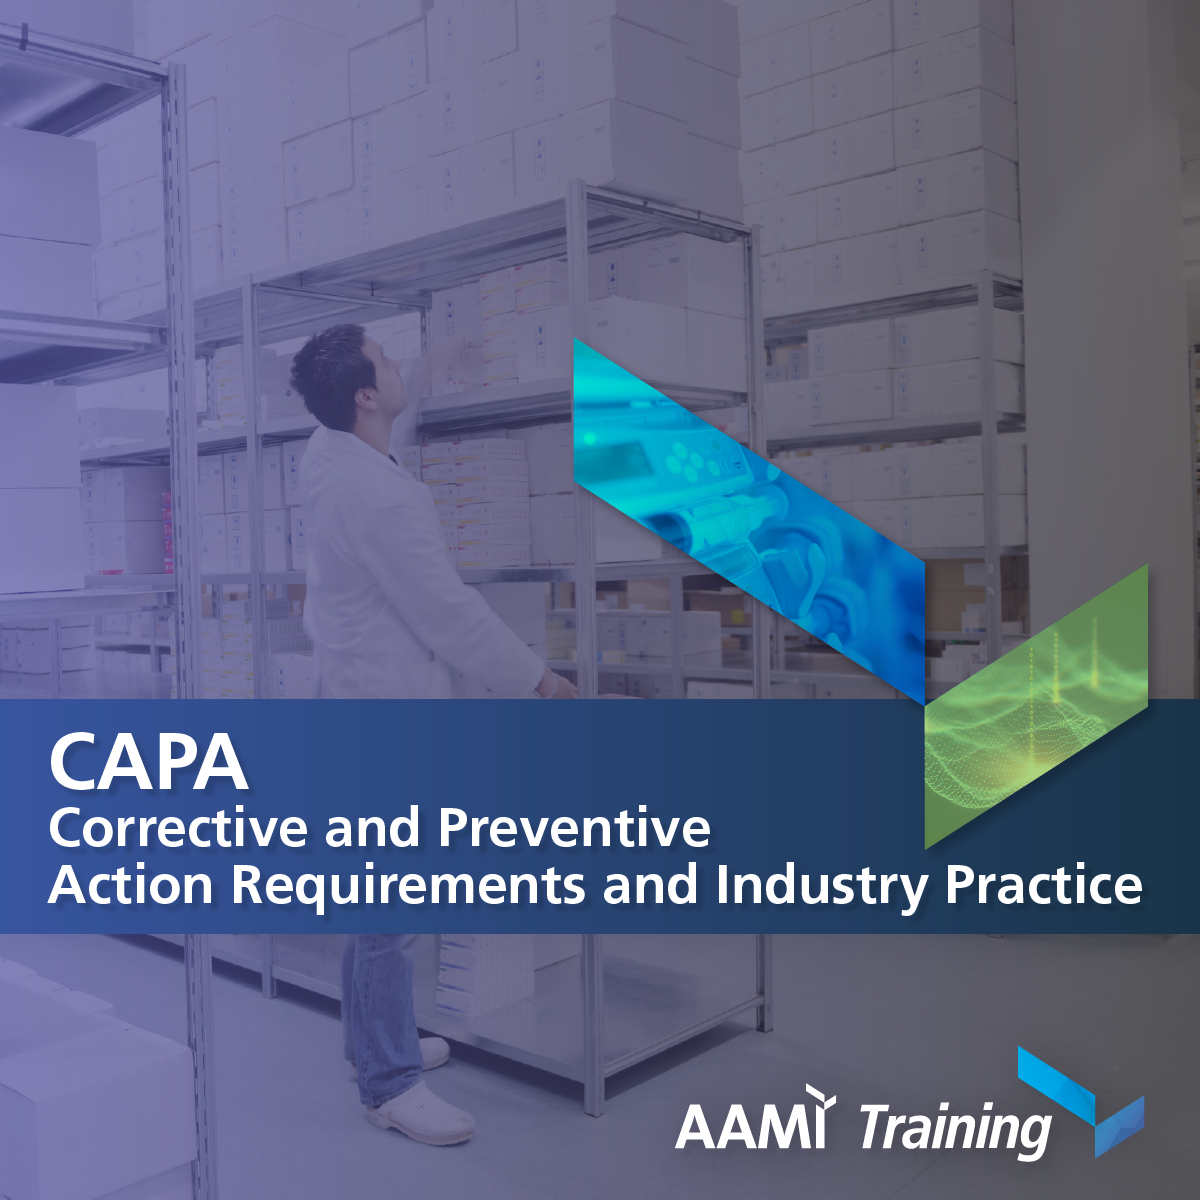 CAPA  - Corrective and Preventative Action Requirements Medical Device Manufacturing and Design Training